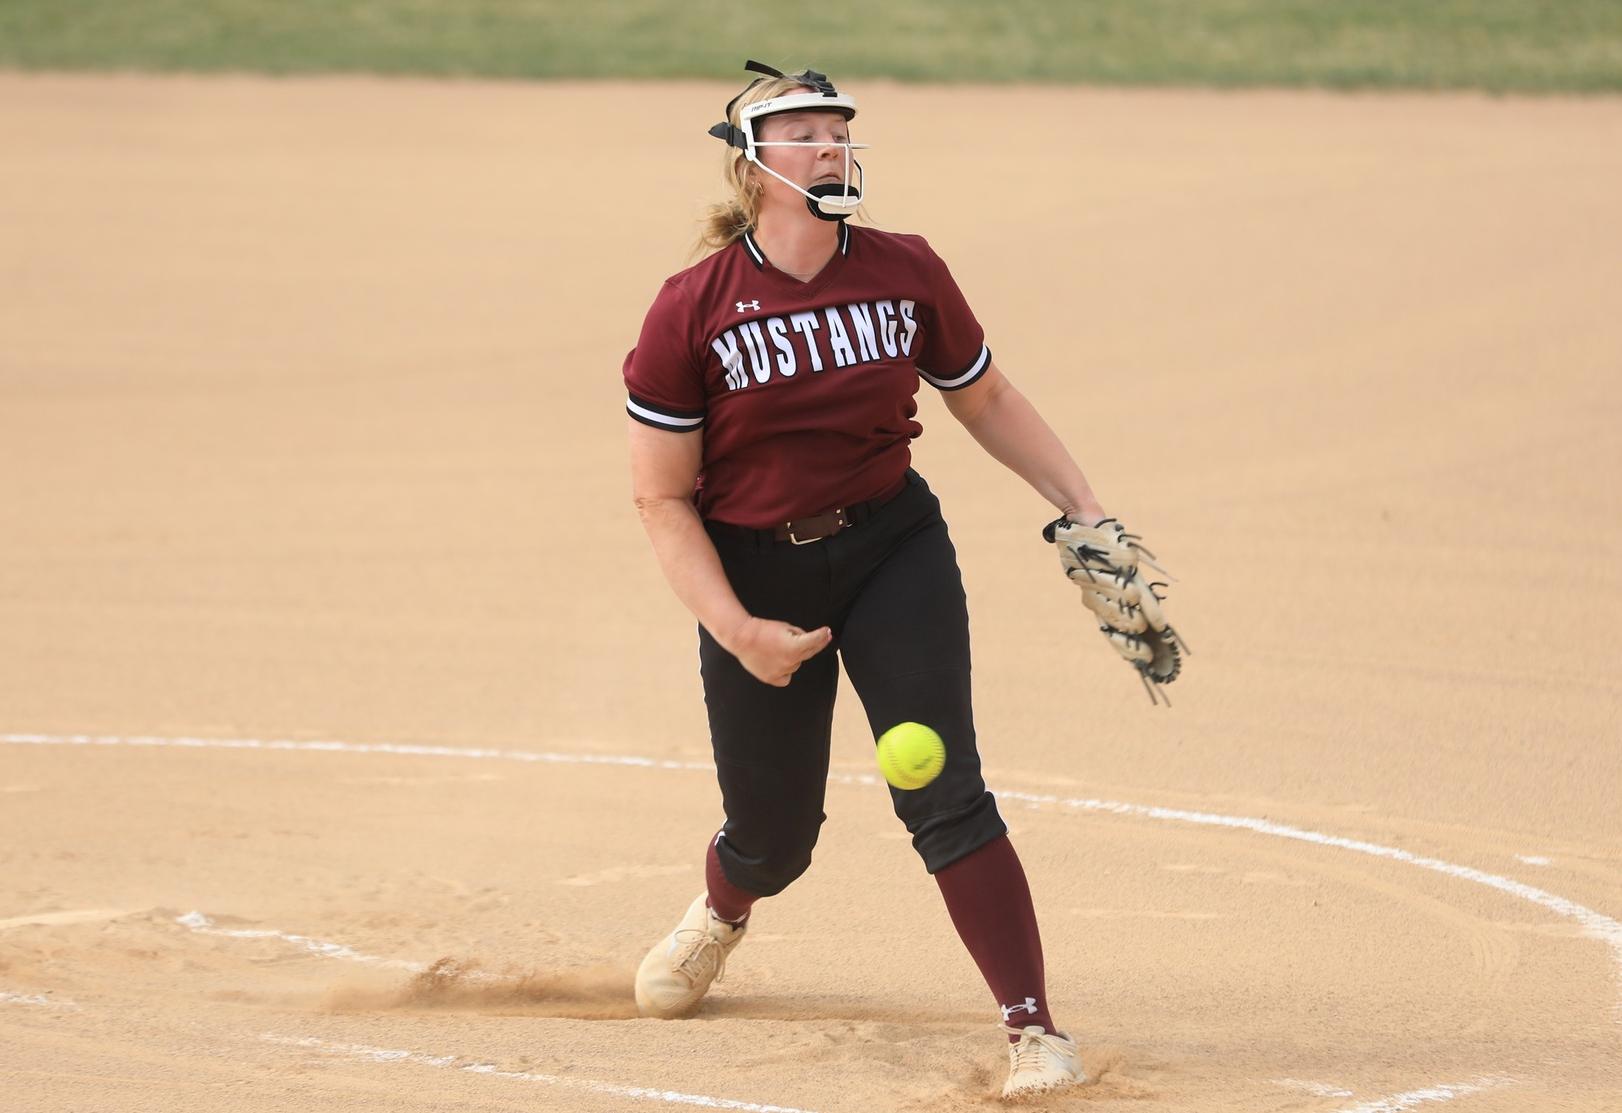 Mid-innings rally sends Morningside to day one split